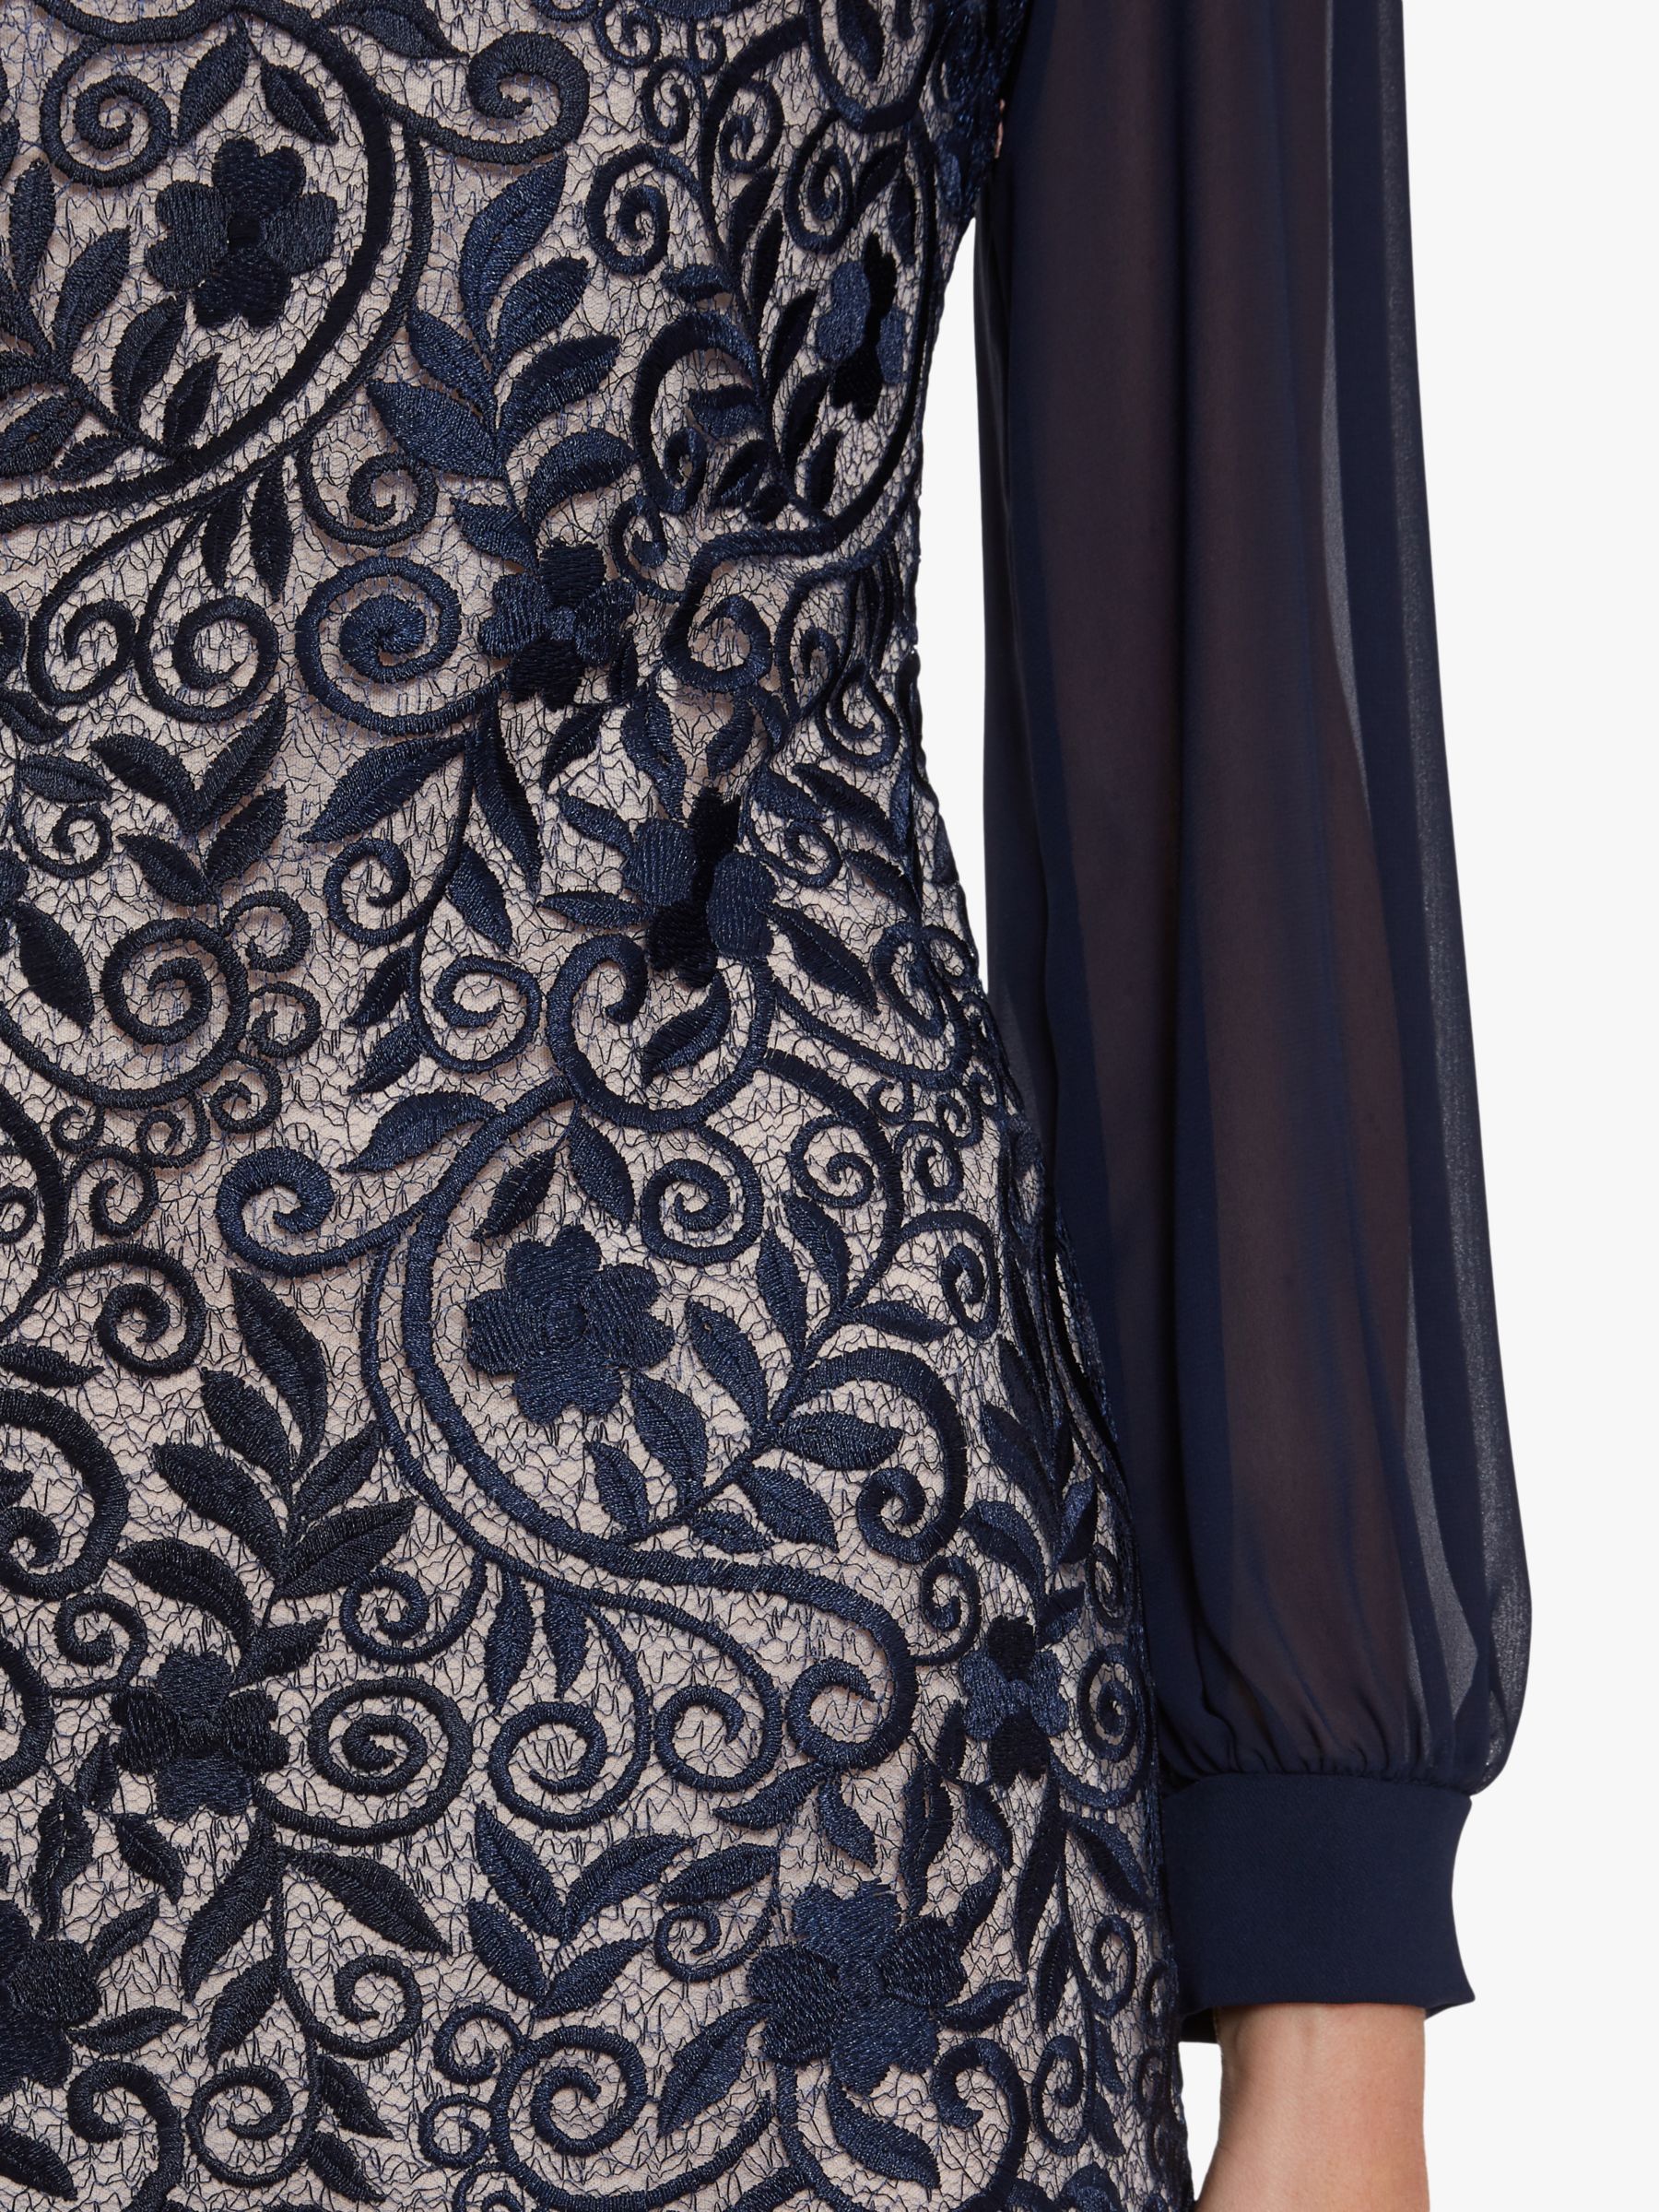 Buy Gina Bacconi Mozelle Embroidered Floral Midi Dress Online at johnlewis.com